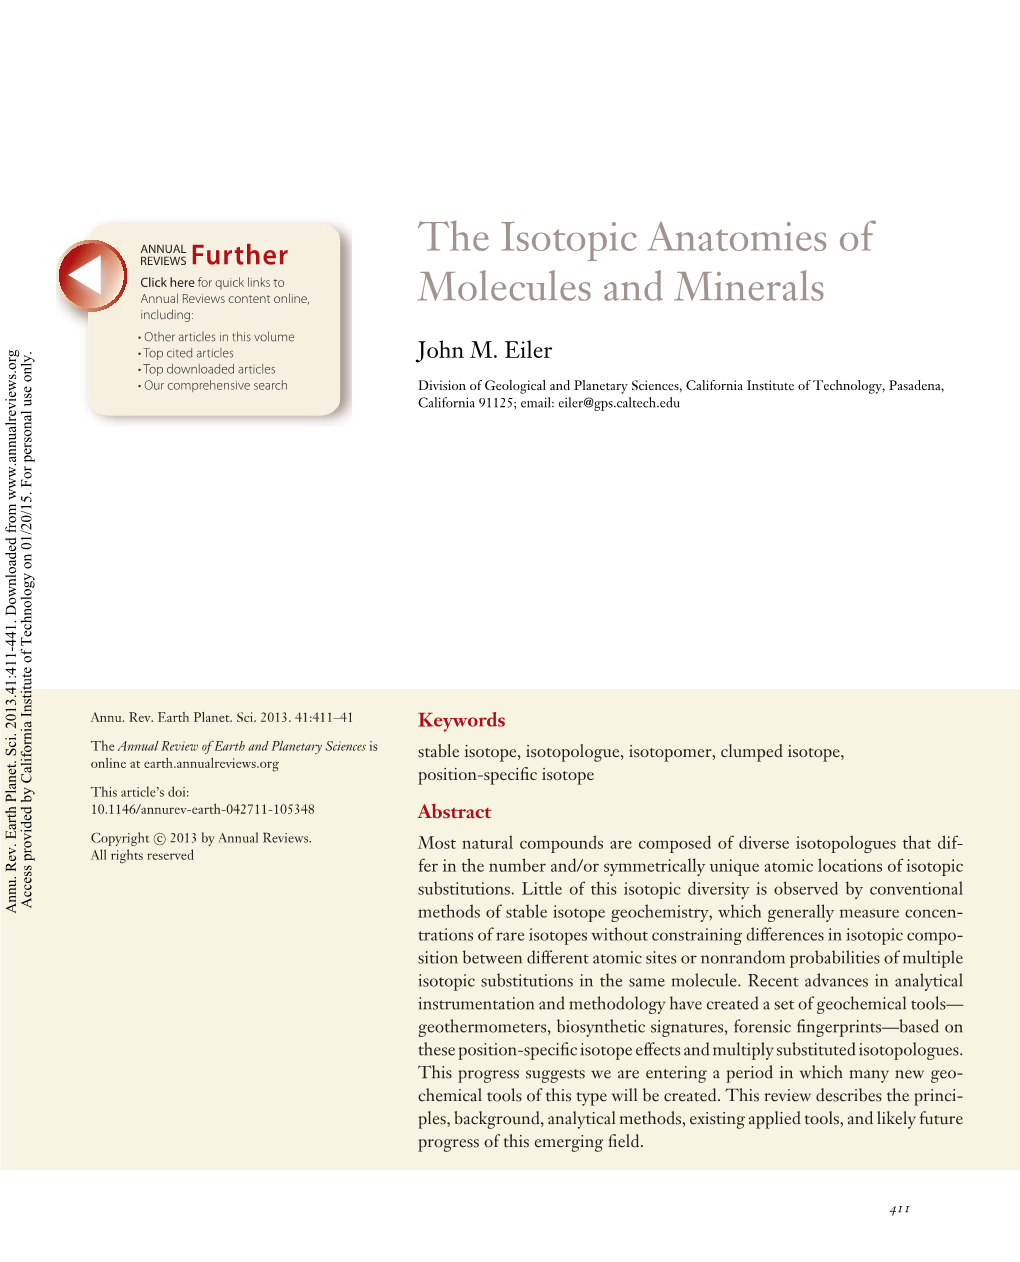 The Isotopic Anatomies of Molecules and Minerals